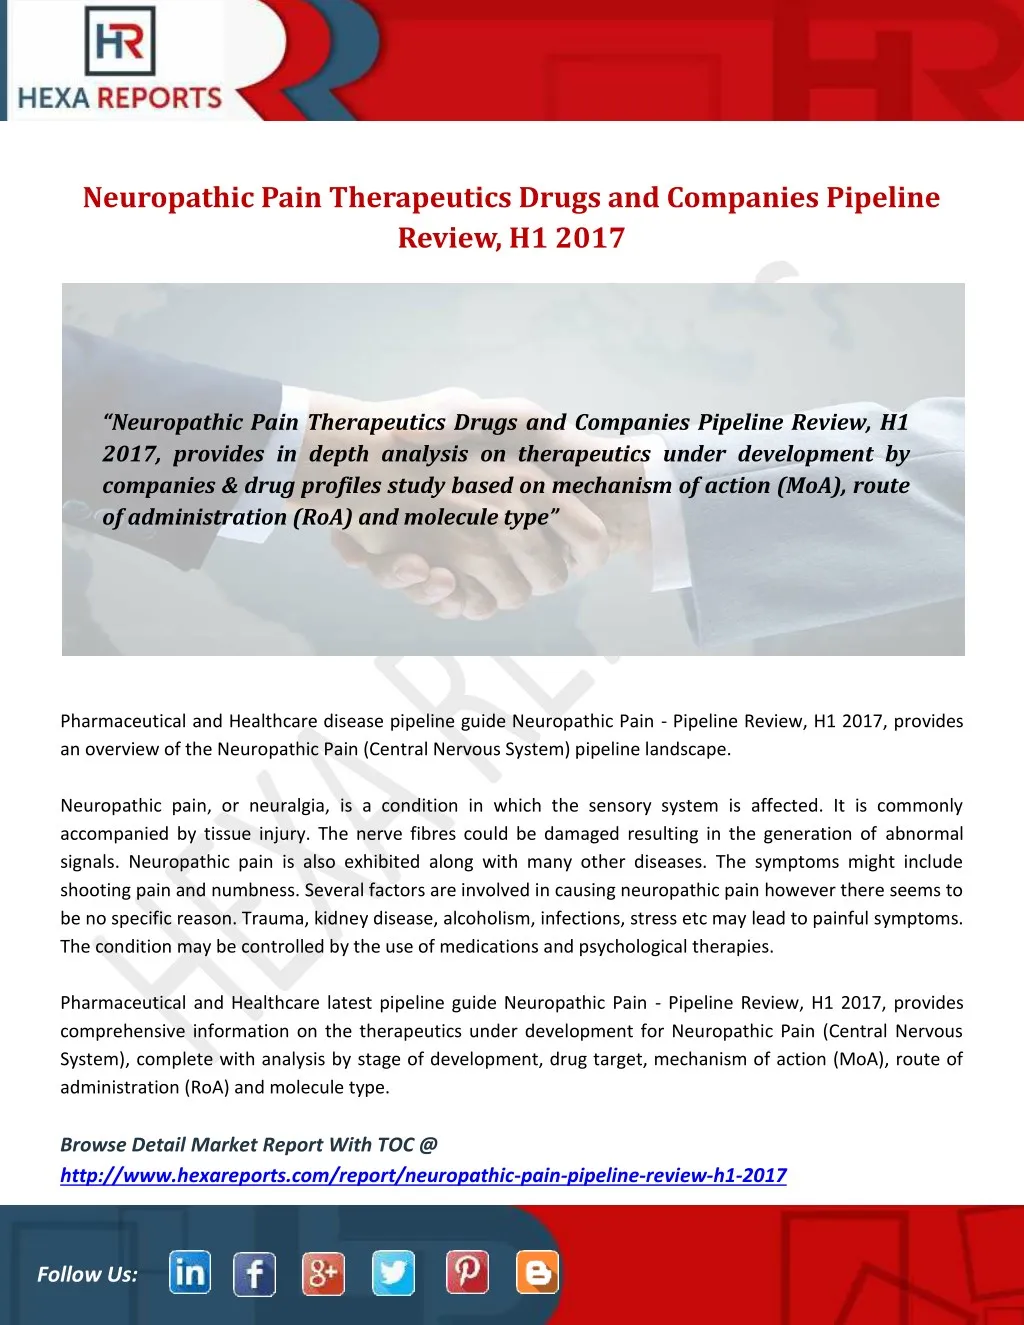 neuropathic pain therapeutics drugs and companies